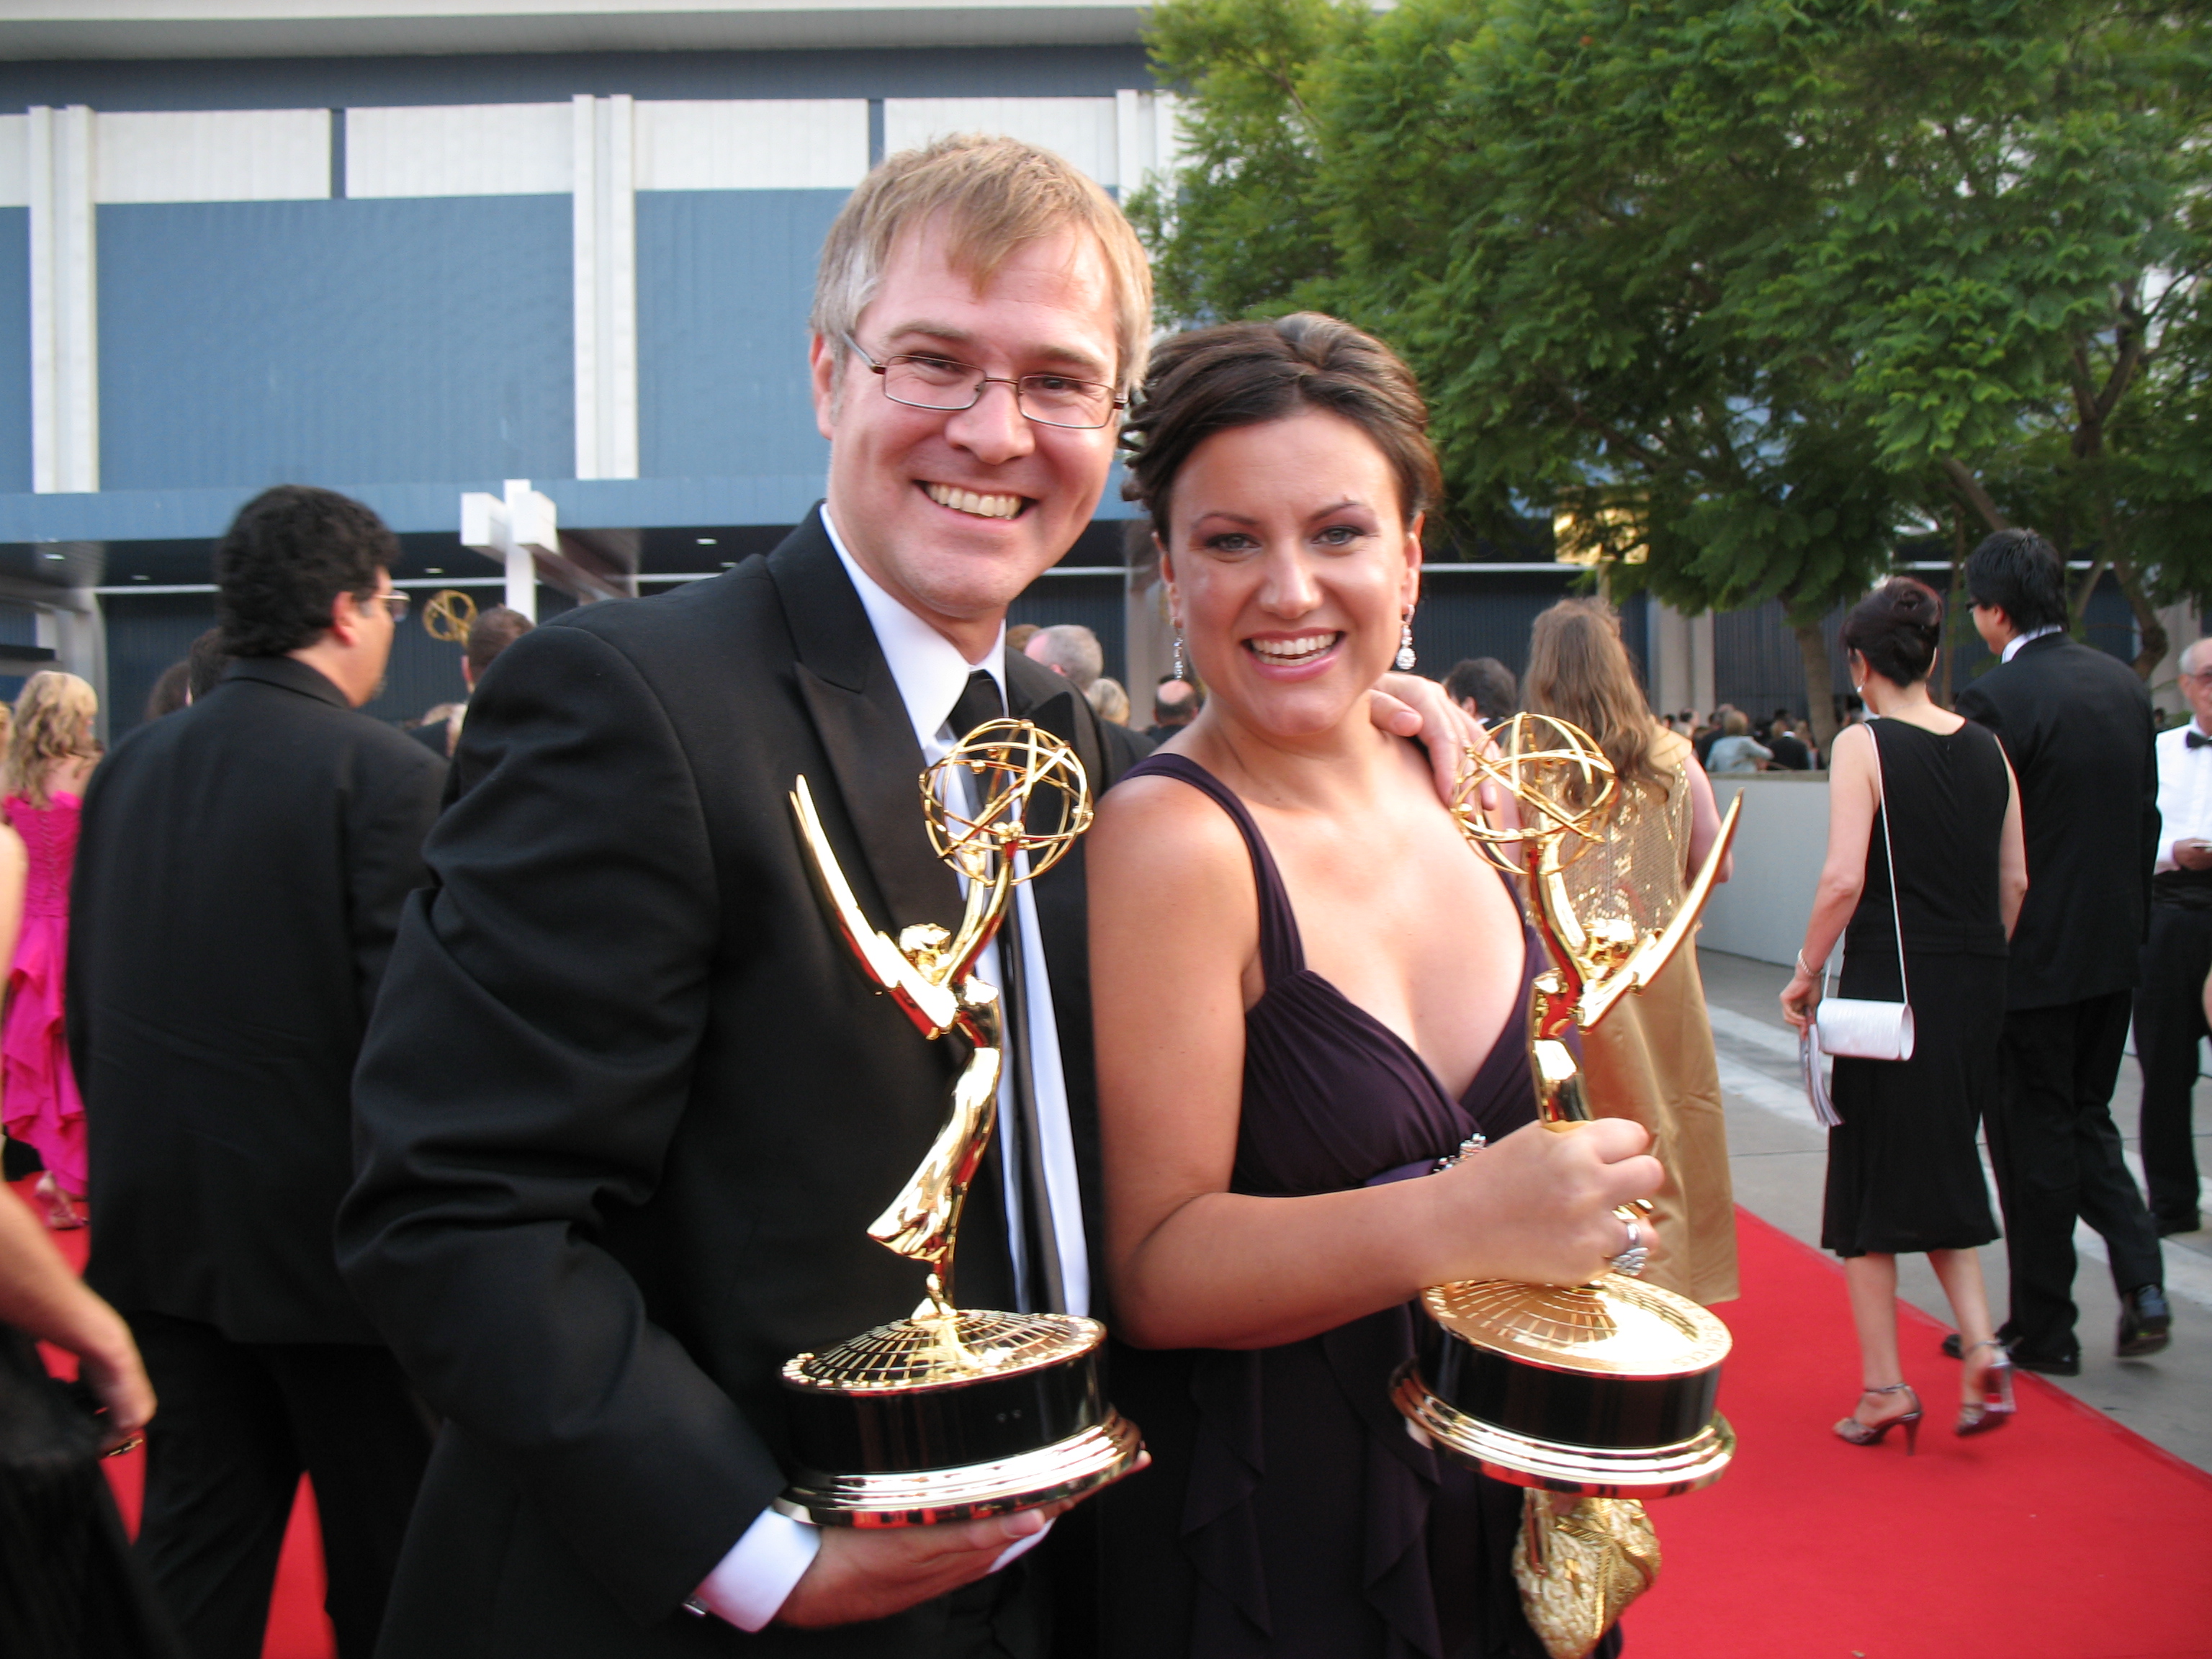 Marc Clark & Katherine Griffin with Emmy's for Best Reality TV Editing for Top Chef Season 3.